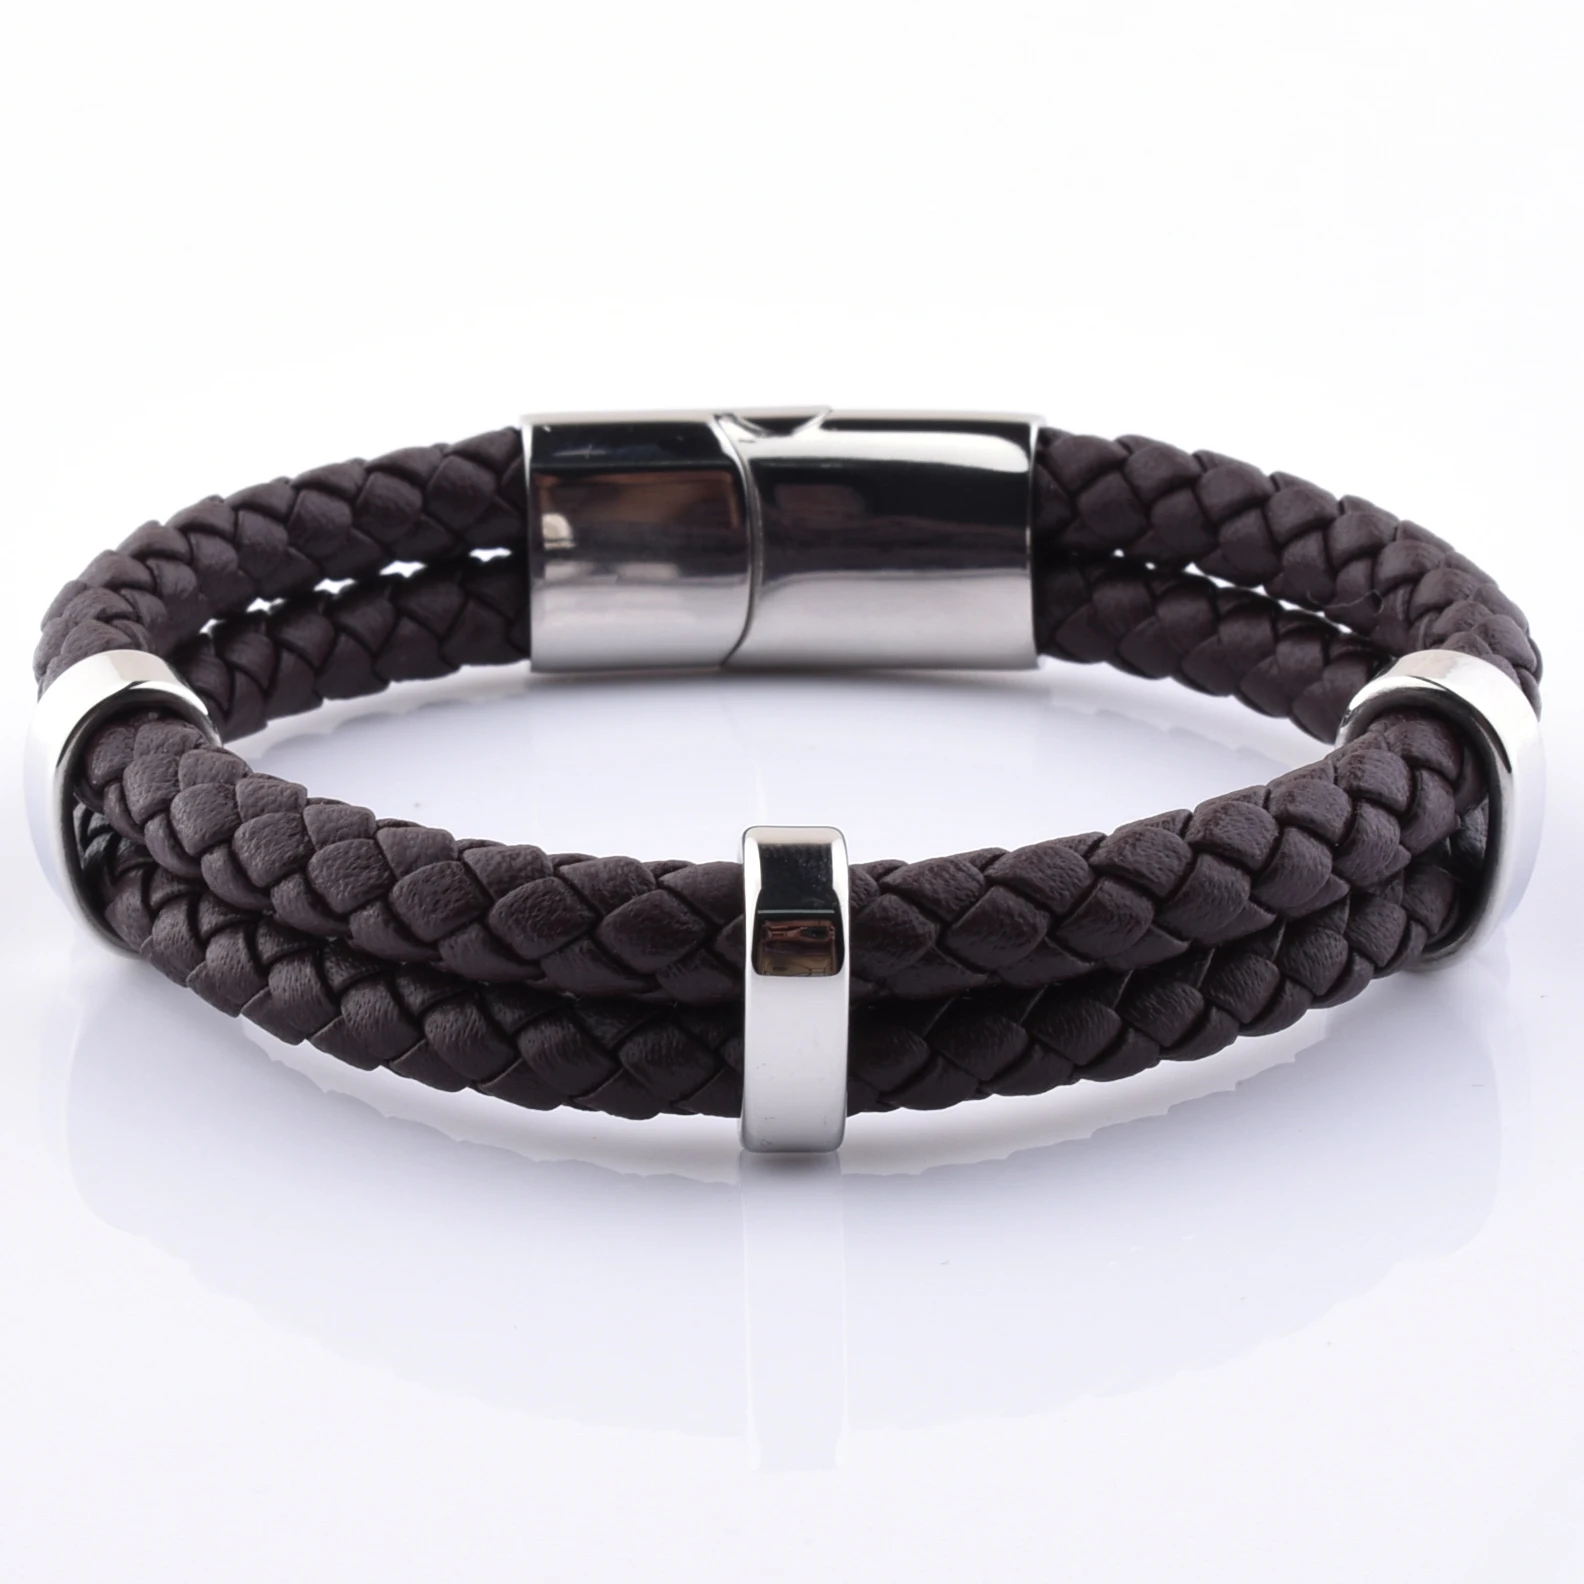 

High Quality Double Brown Braided Leather Silver Charm Stainless Steel Double Genuine Leather Clasp Bracelet